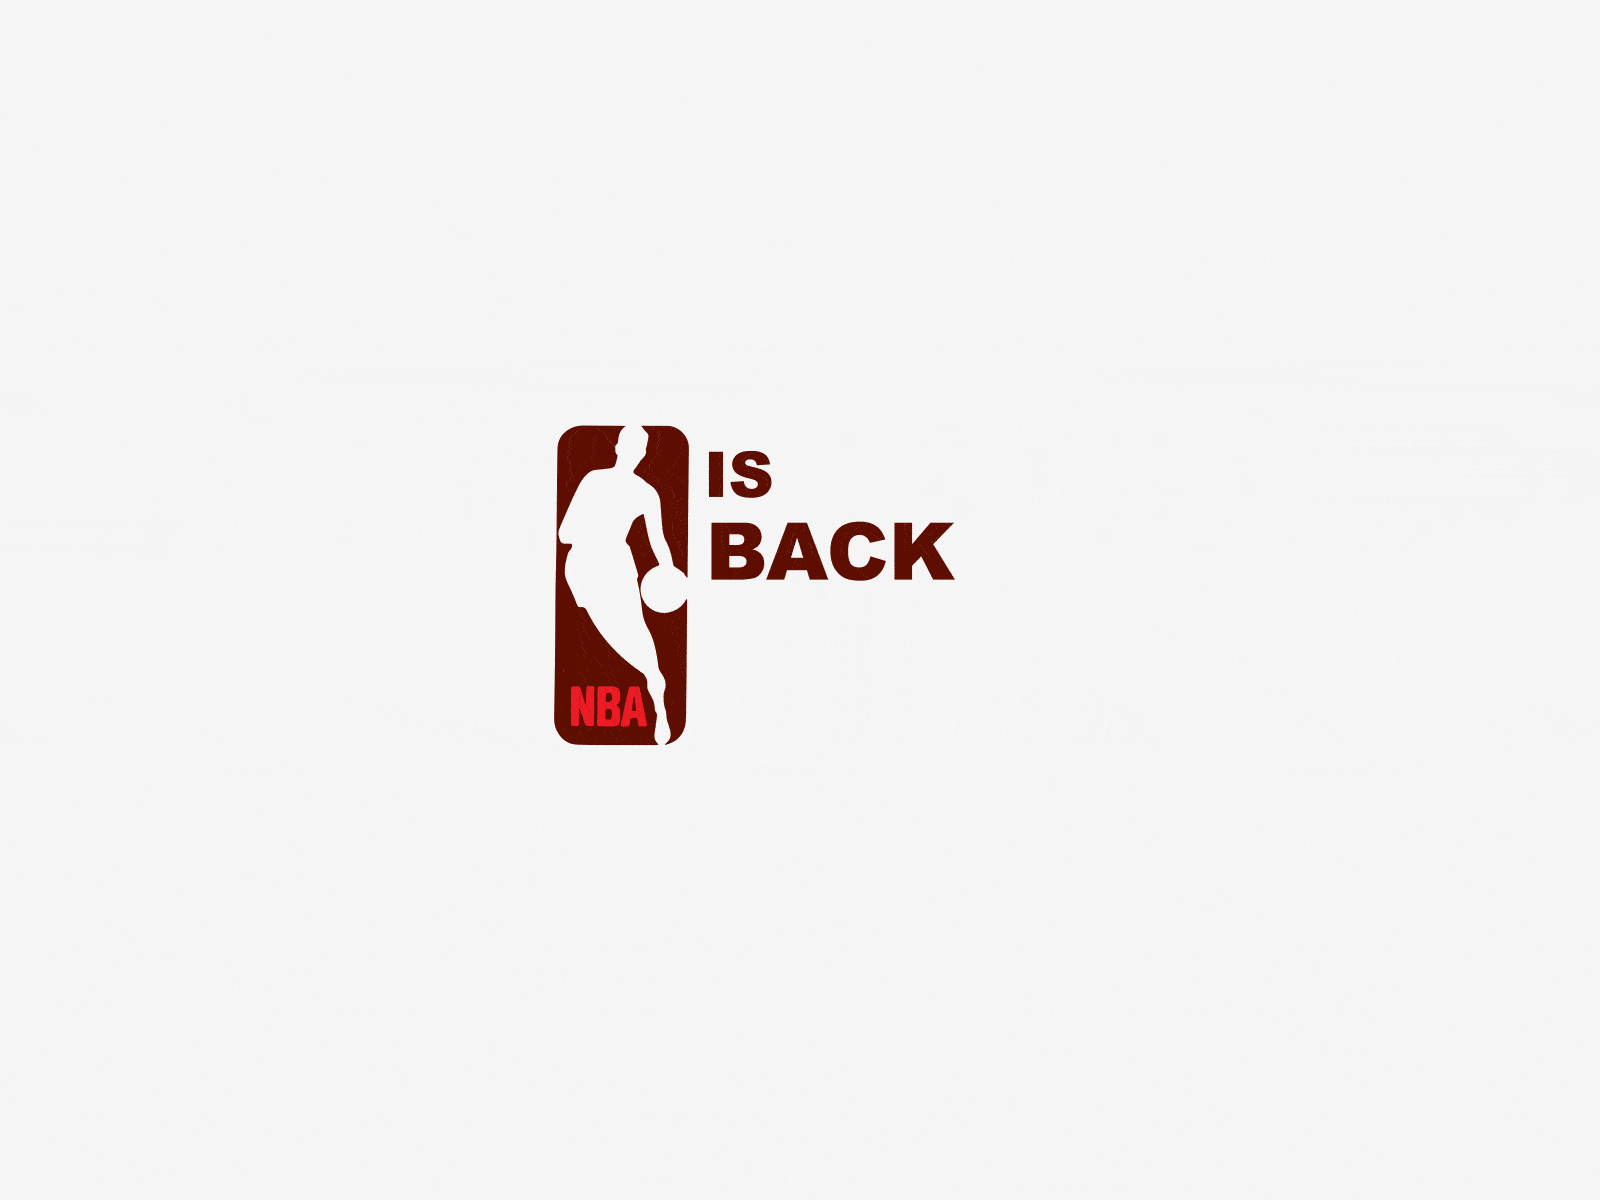 NBA IS BACK FOR XMAS